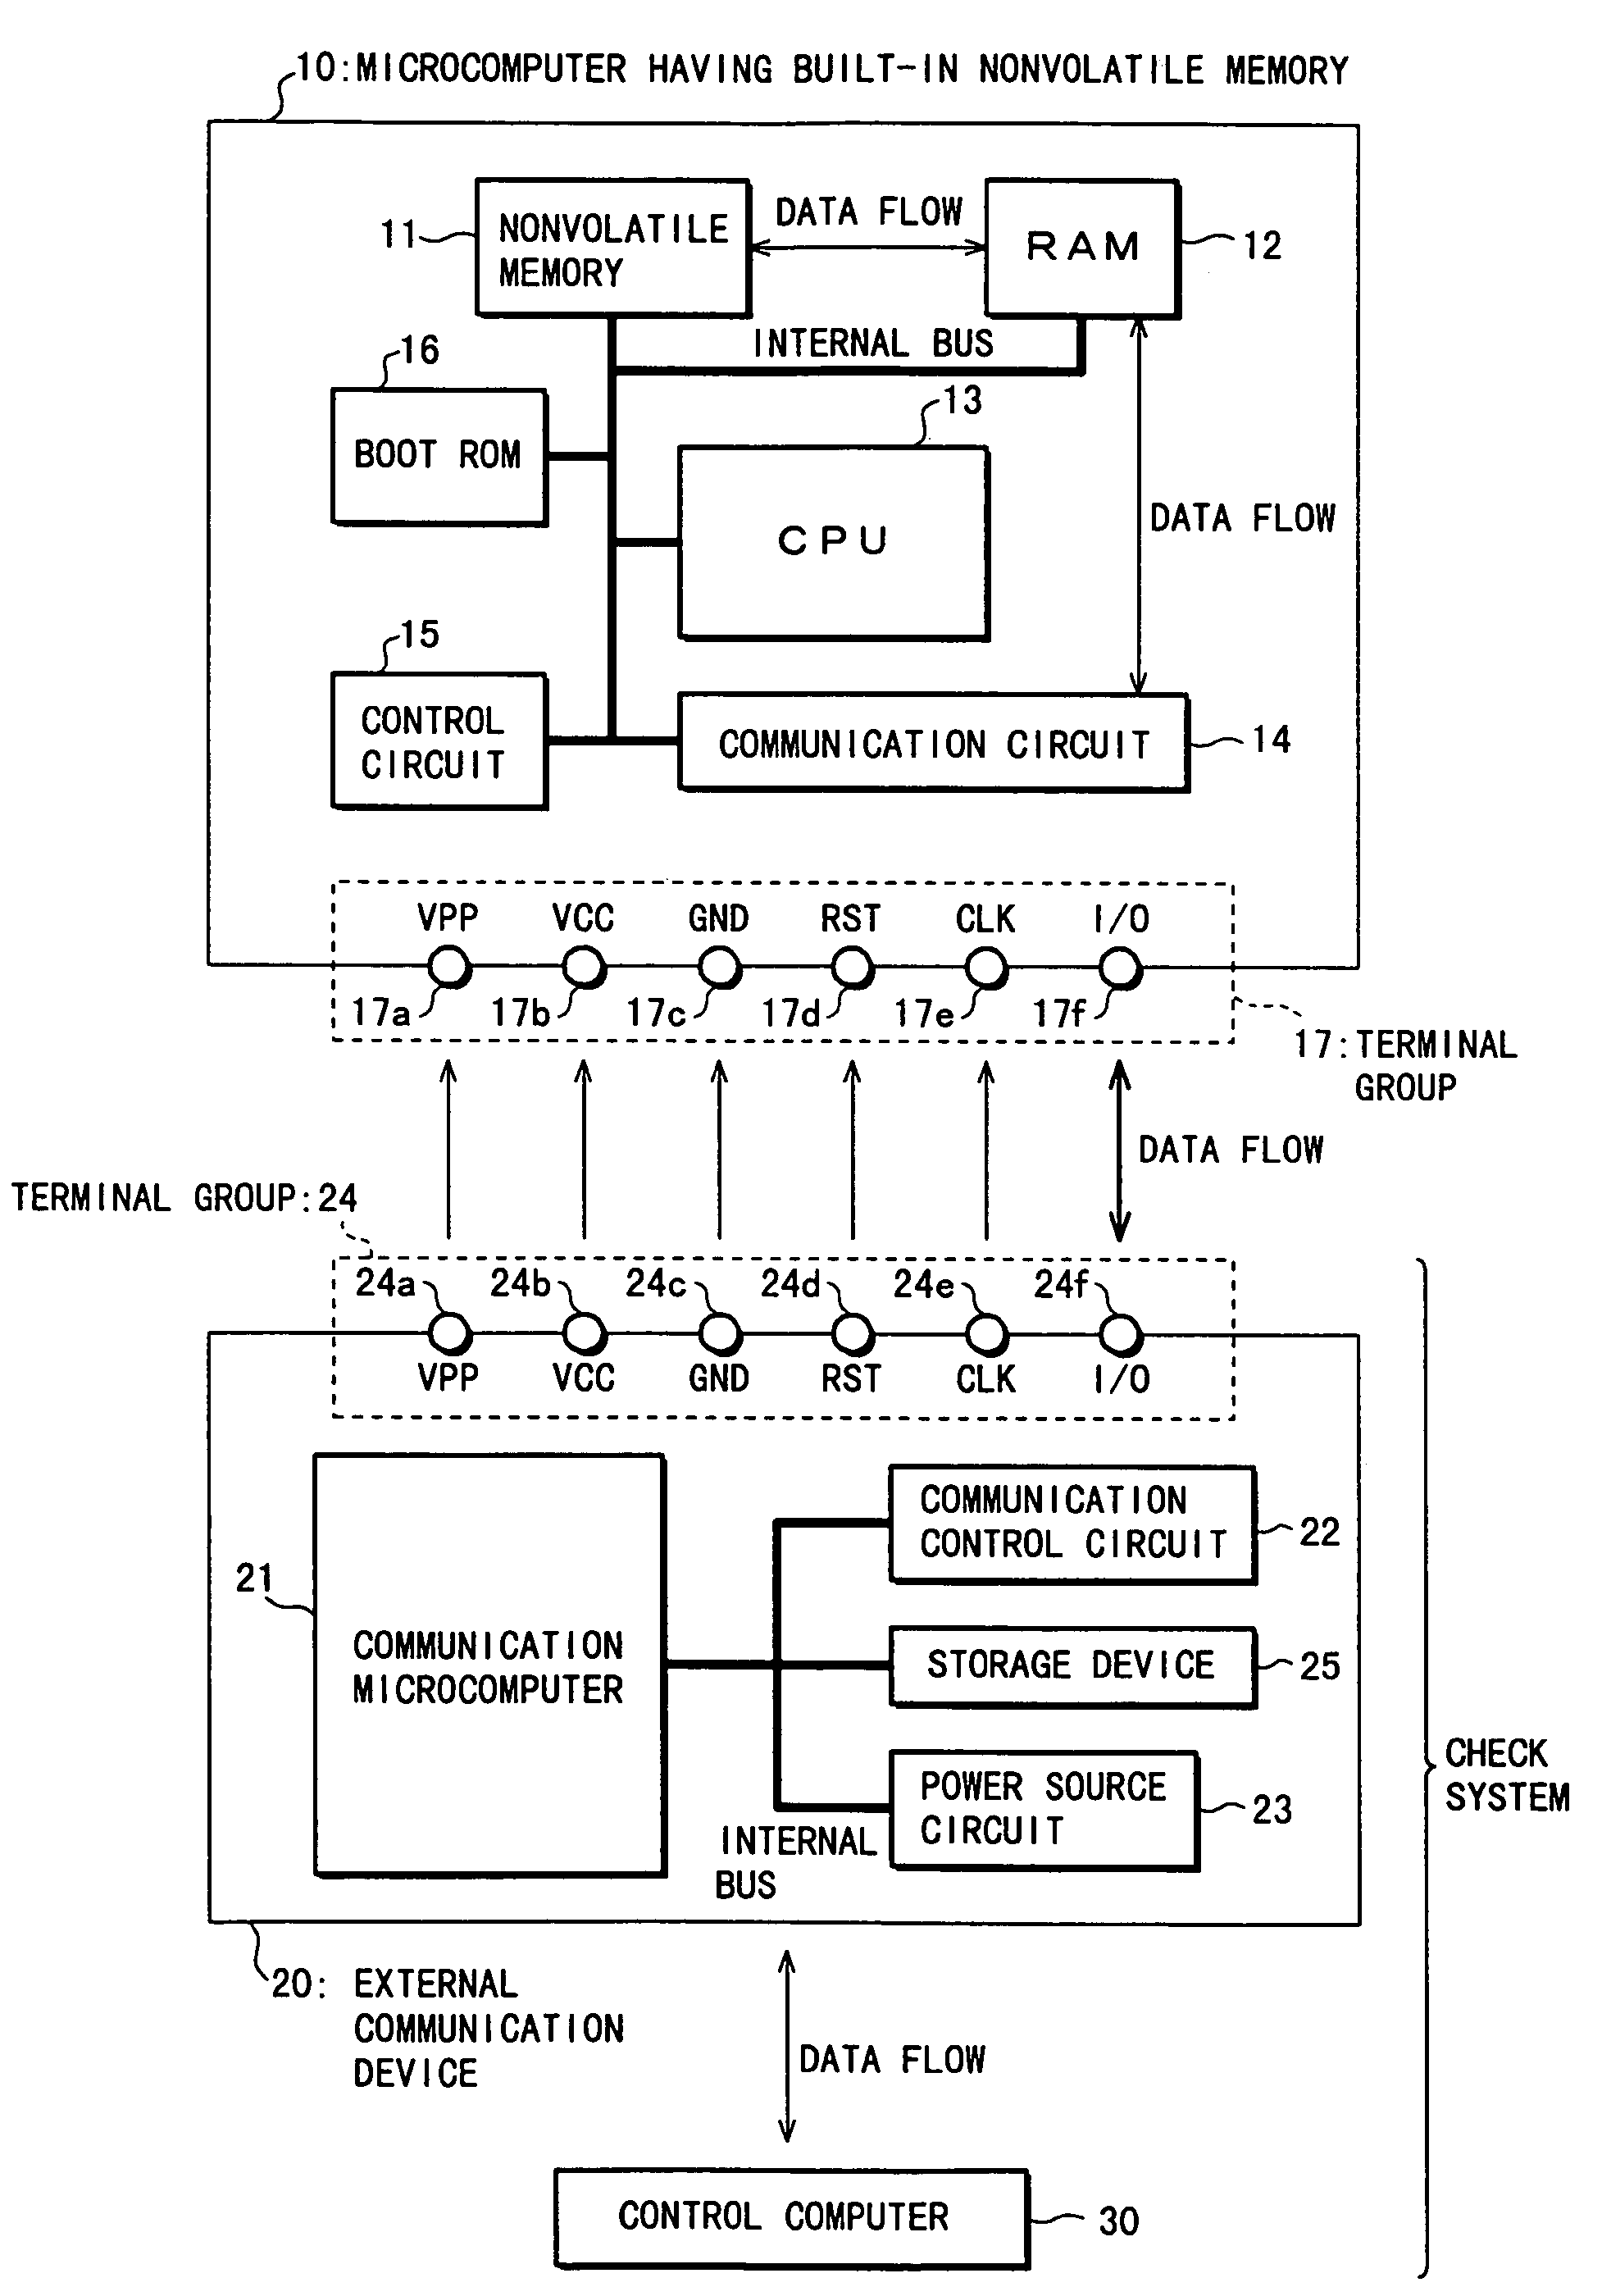 Microcomputer having built-in nonvolatile memory and check system thereof and IC card packing microcomputer having built-in nonvolatile memory and check system thereof